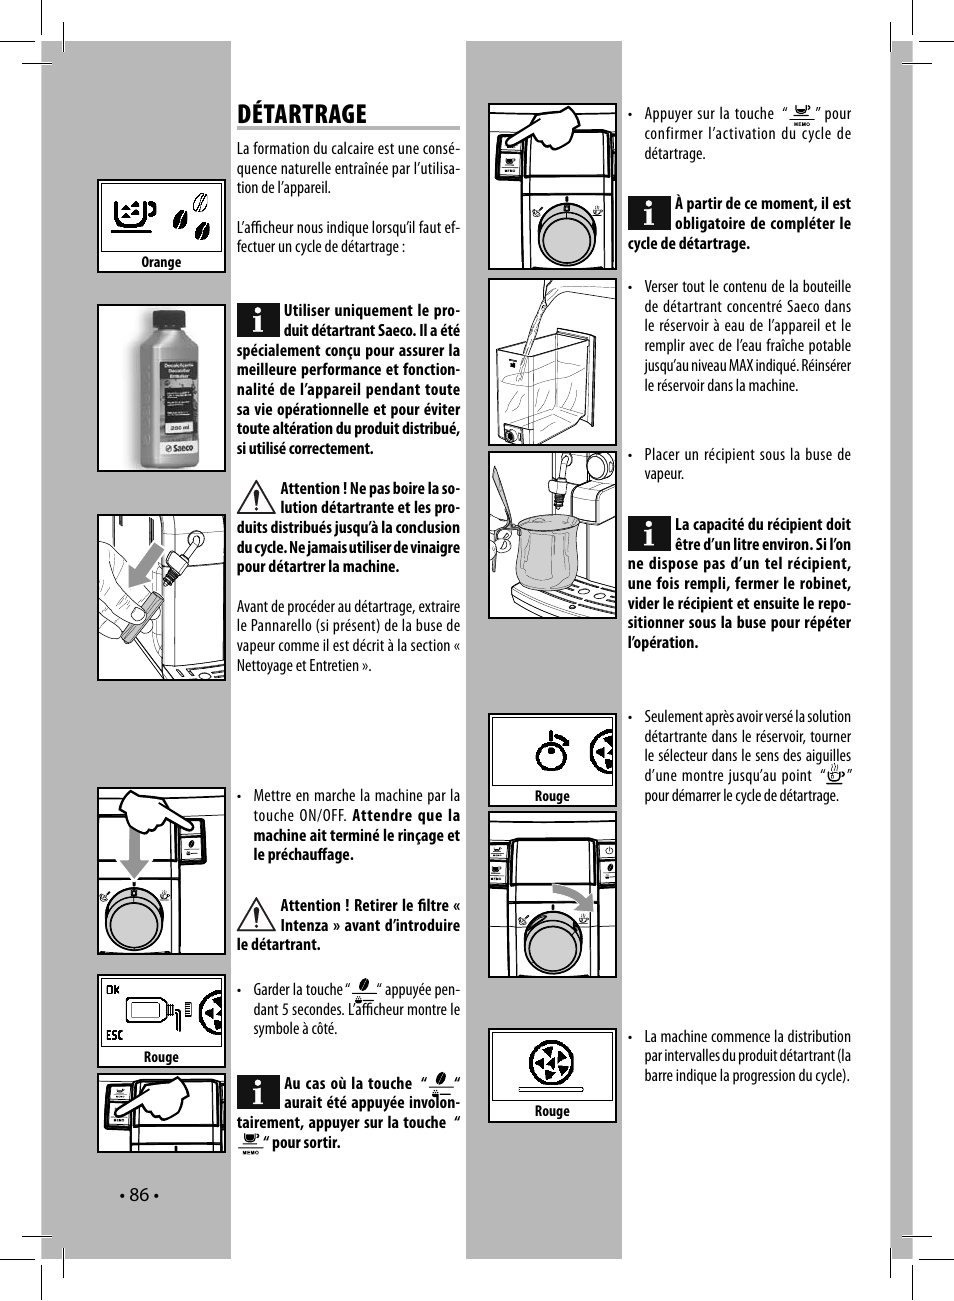 Emulate be quiet repertoire Détartrage | Philips Saeco Syntia Kaffeevollautomat User Manual | Page 86 /  96 | Original mode